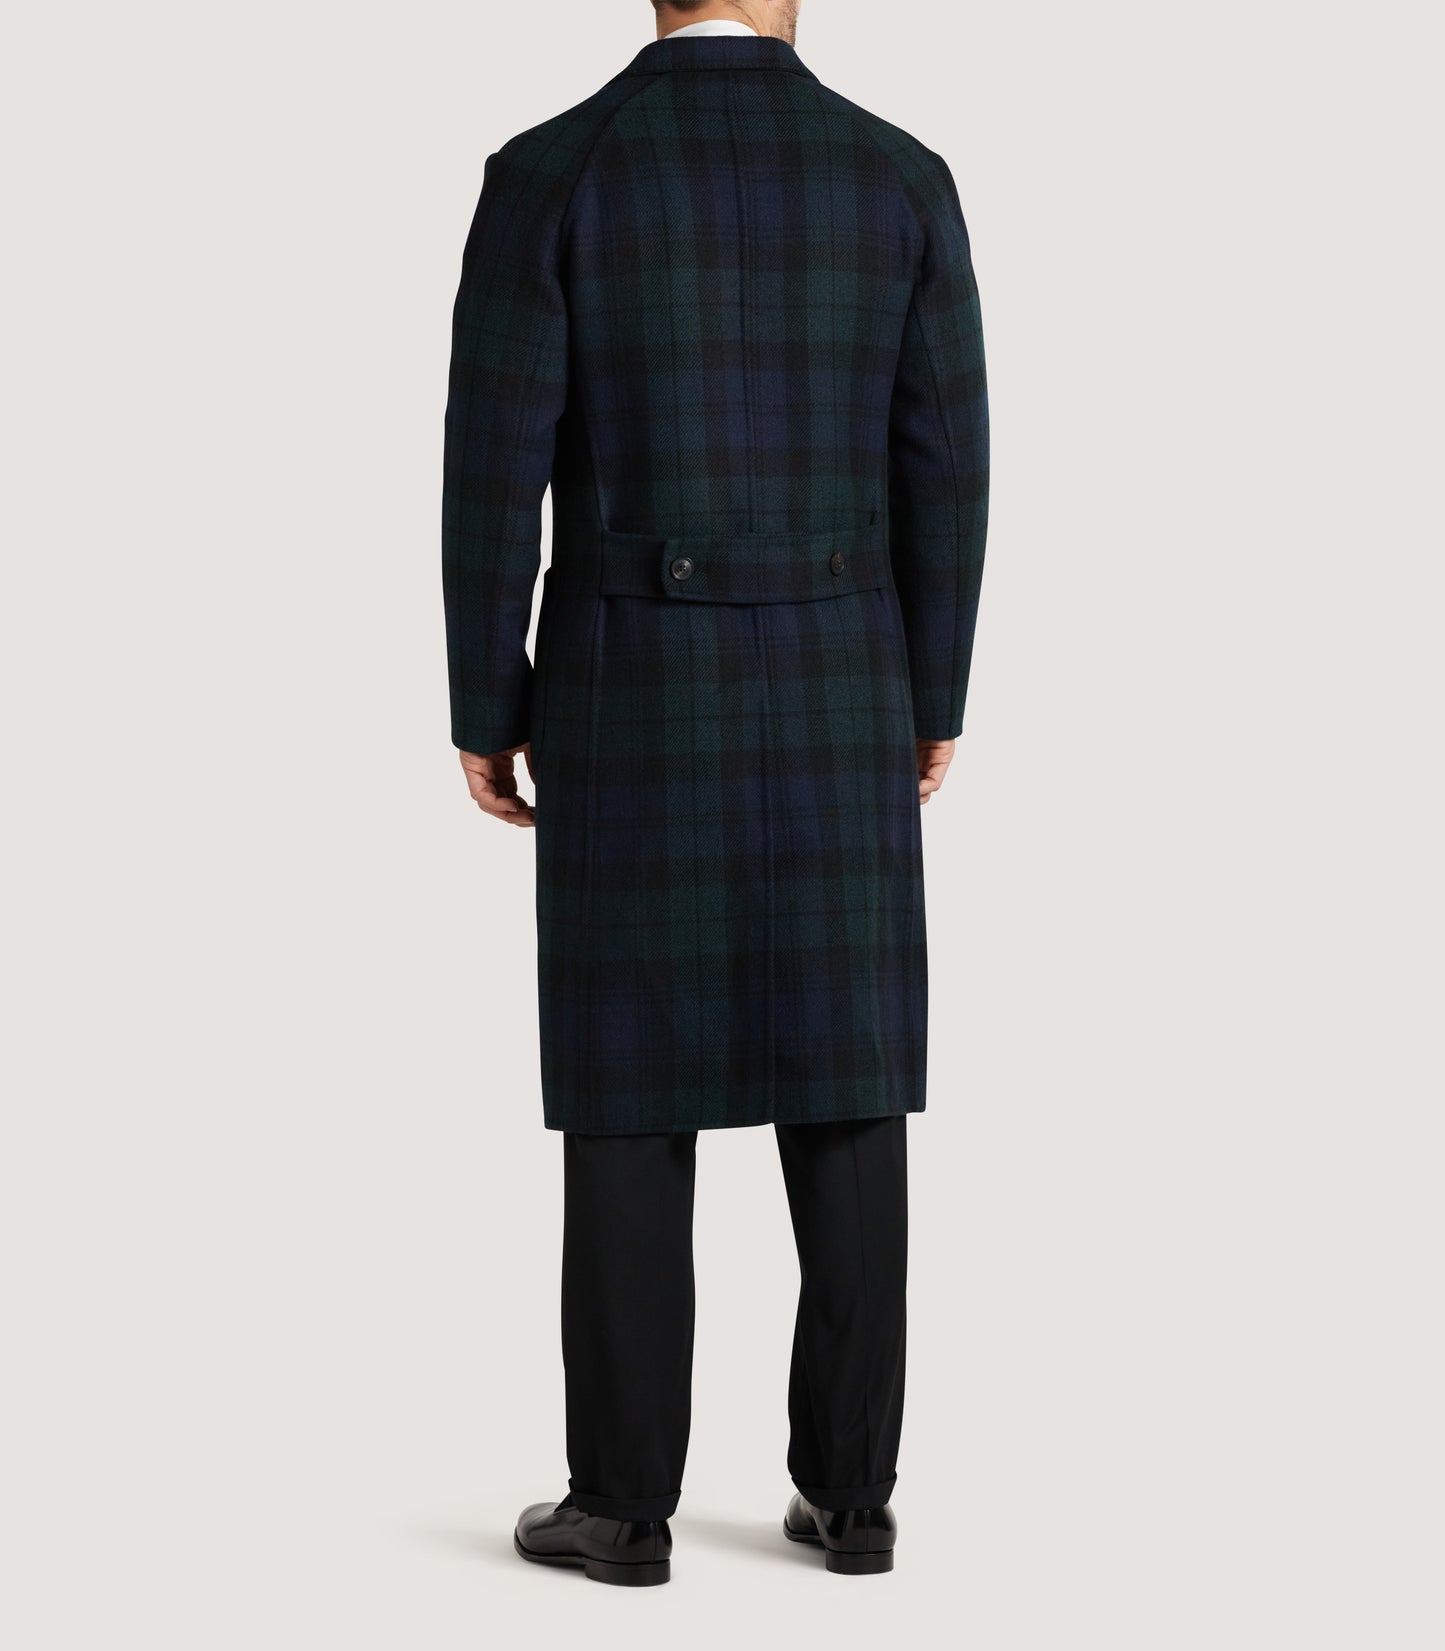 Men's Estate Evening Town And Country Coat